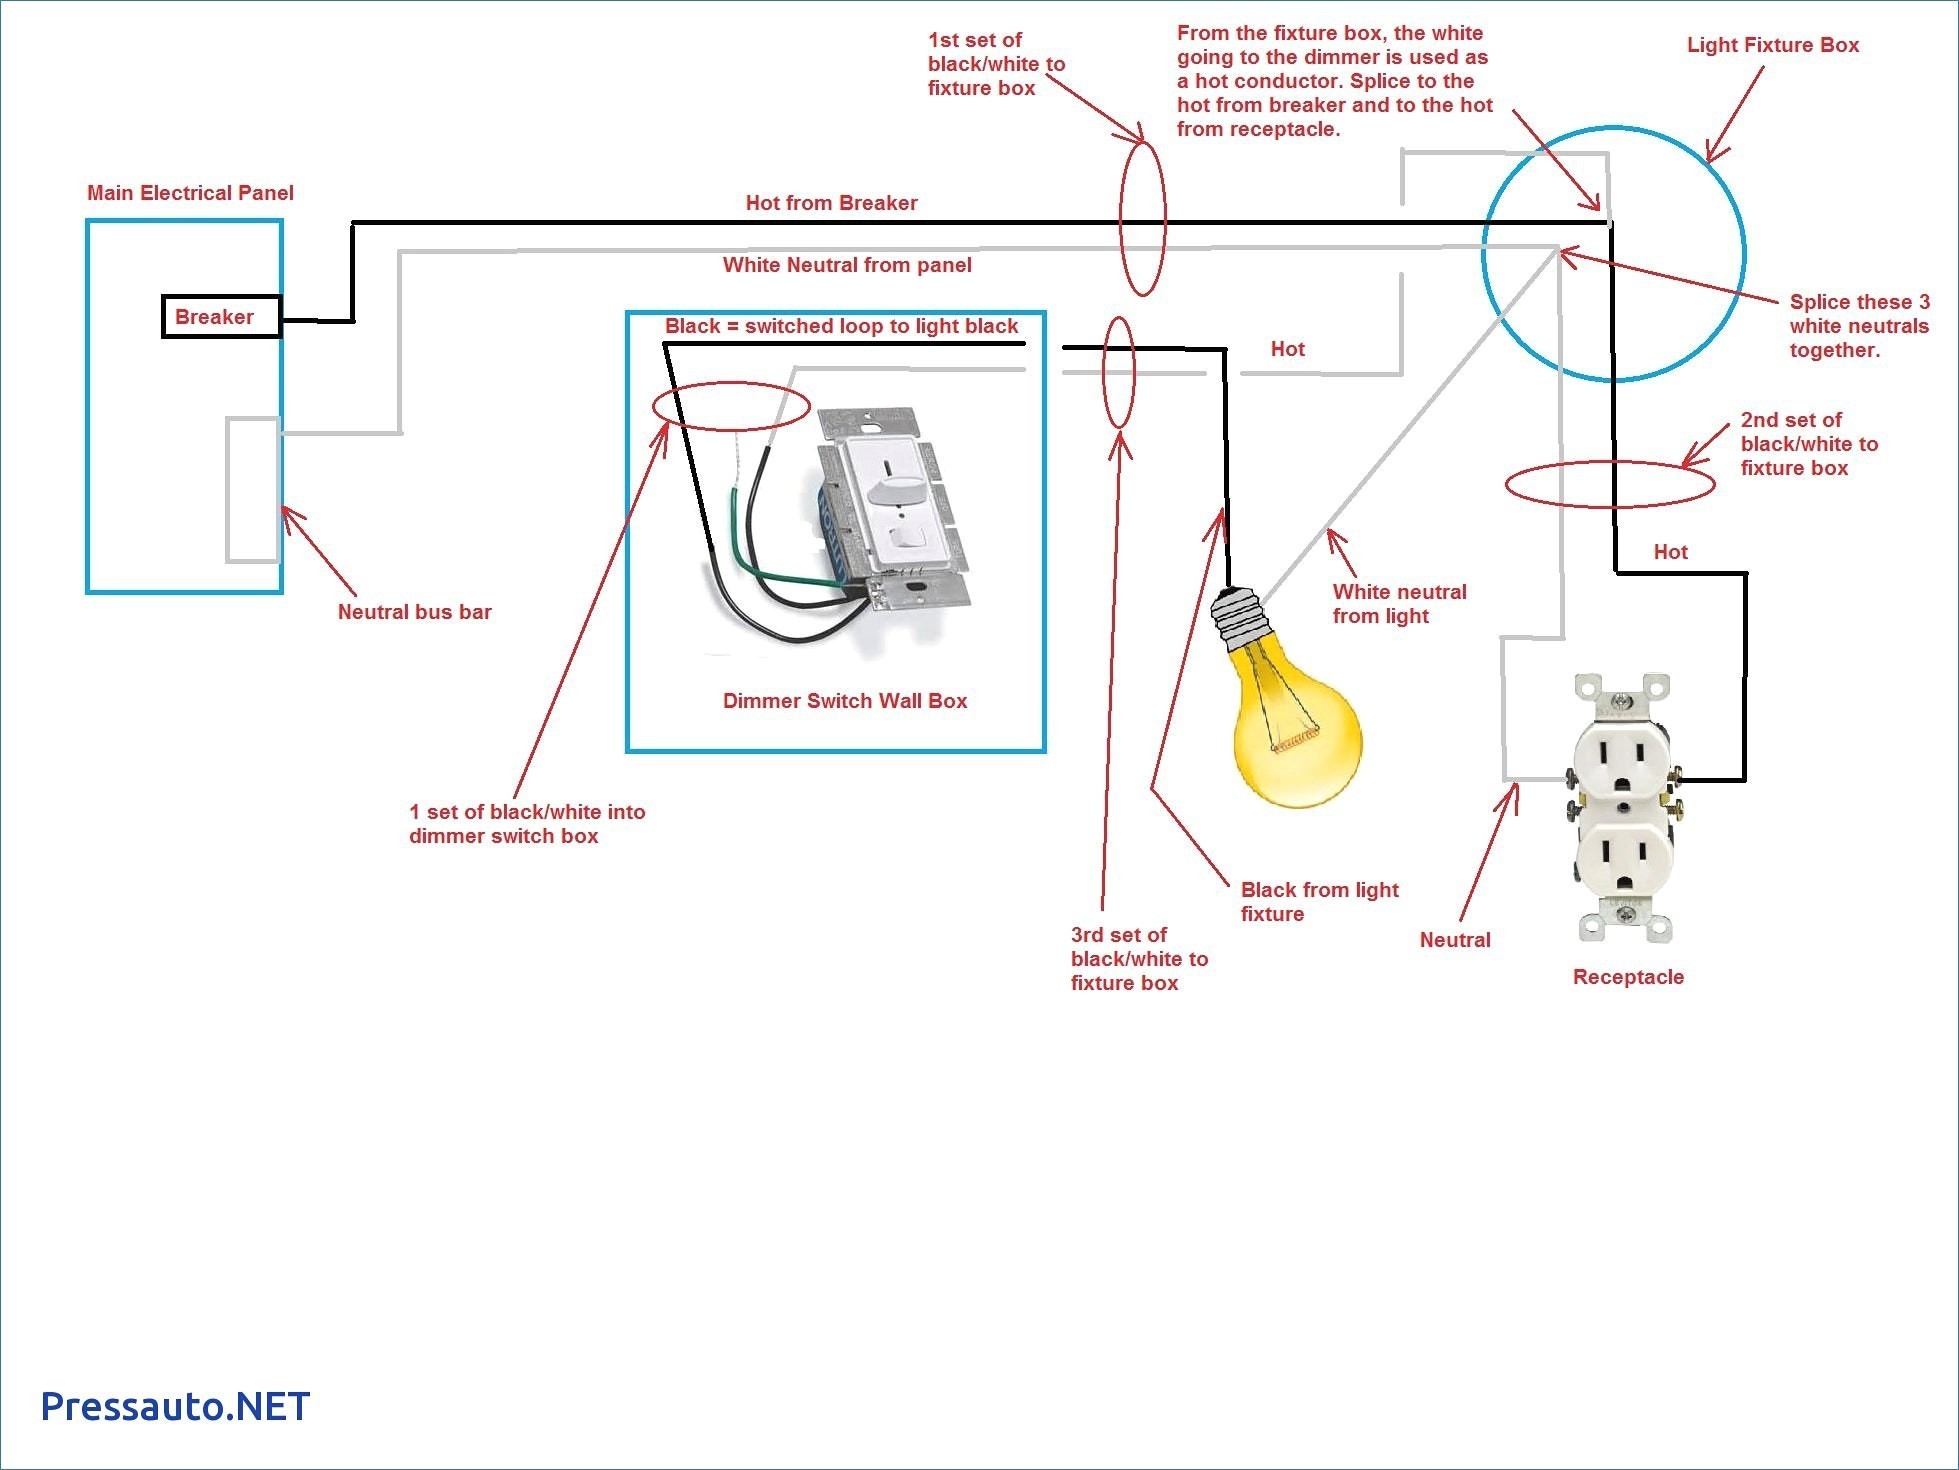 Wiring Diagram Switch Receptacle bination Save Wiring A Light Switch to An Outlet Elegant Wiring Diagram